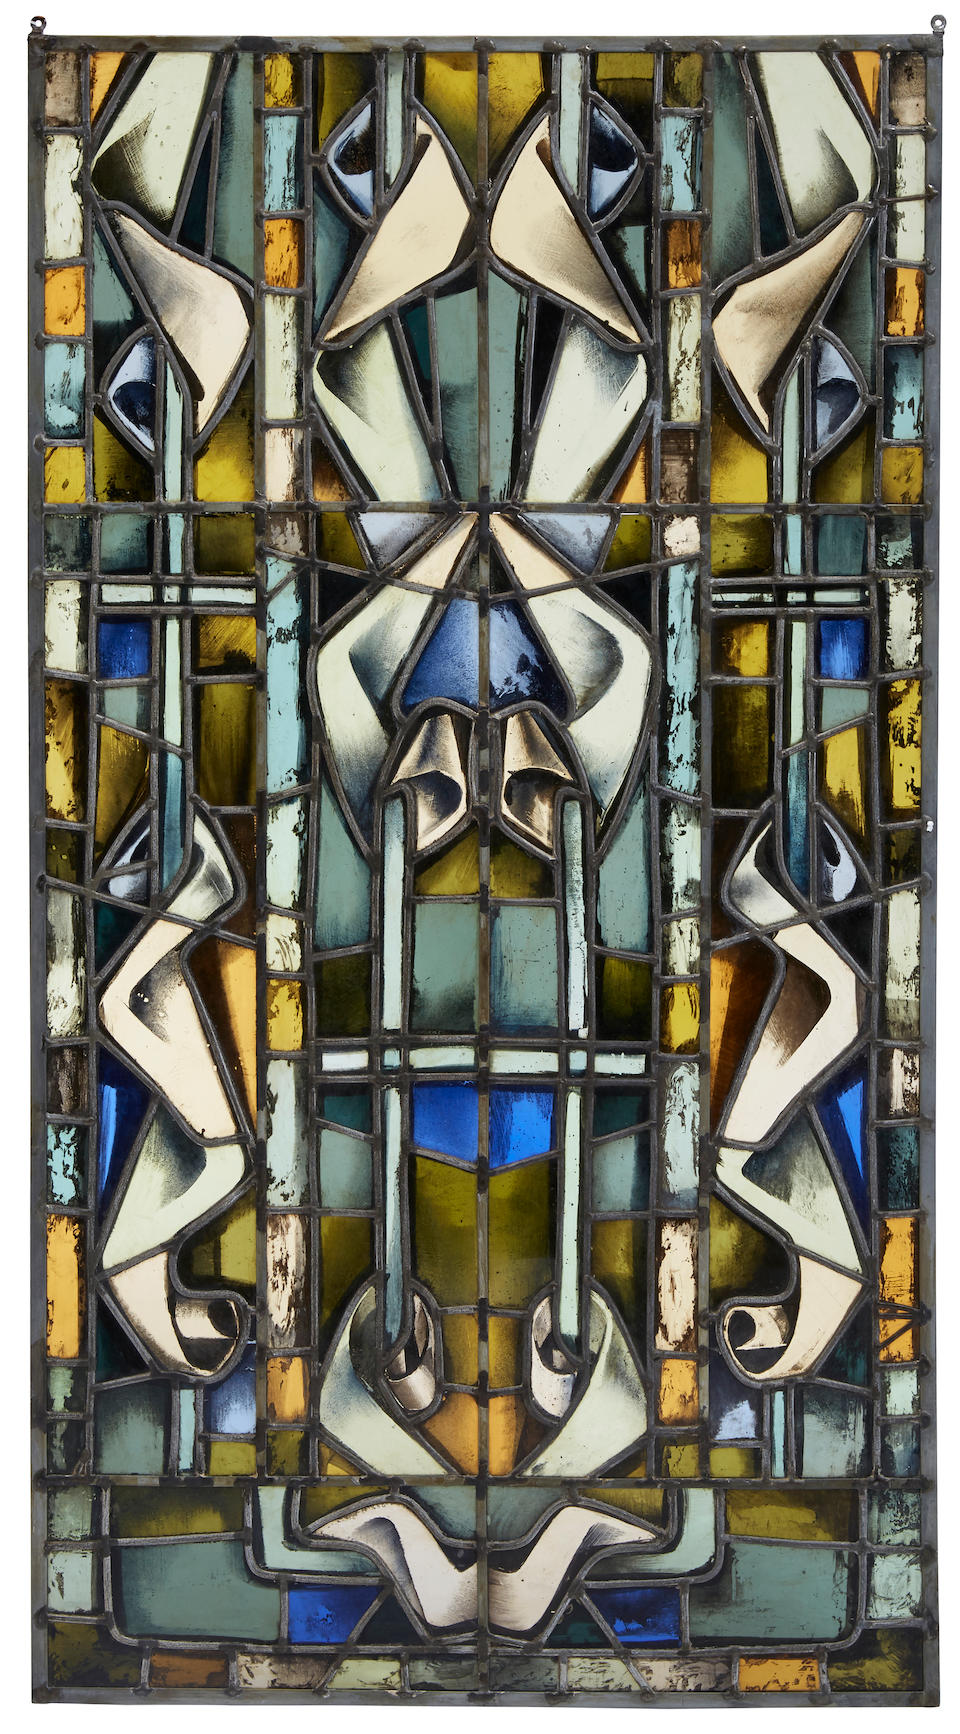 Max Ingrand (1908-1969) Group of Four Windowscirca 1950painted, stained and leaded glass, three windows etched in lower right corner 'MAX INGRAND MADE IN FRANCE'height of largest 51 1/4in (130.1cm); width 28in (71.1cm); depth 1/4in (.6cm)